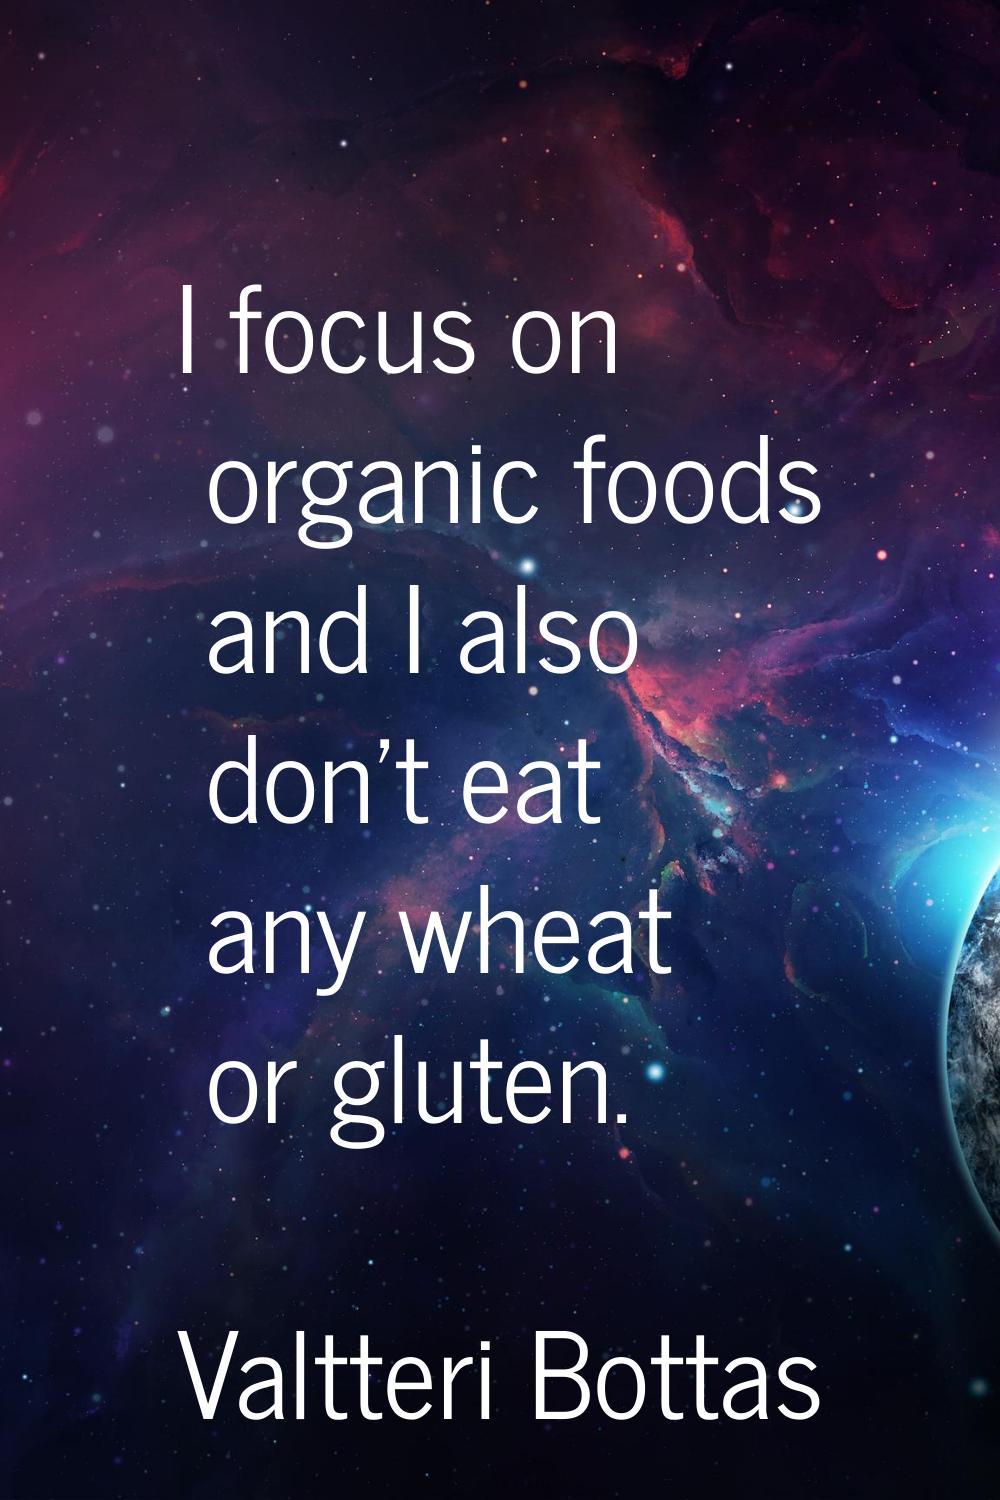 I focus on organic foods and I also don't eat any wheat or gluten.